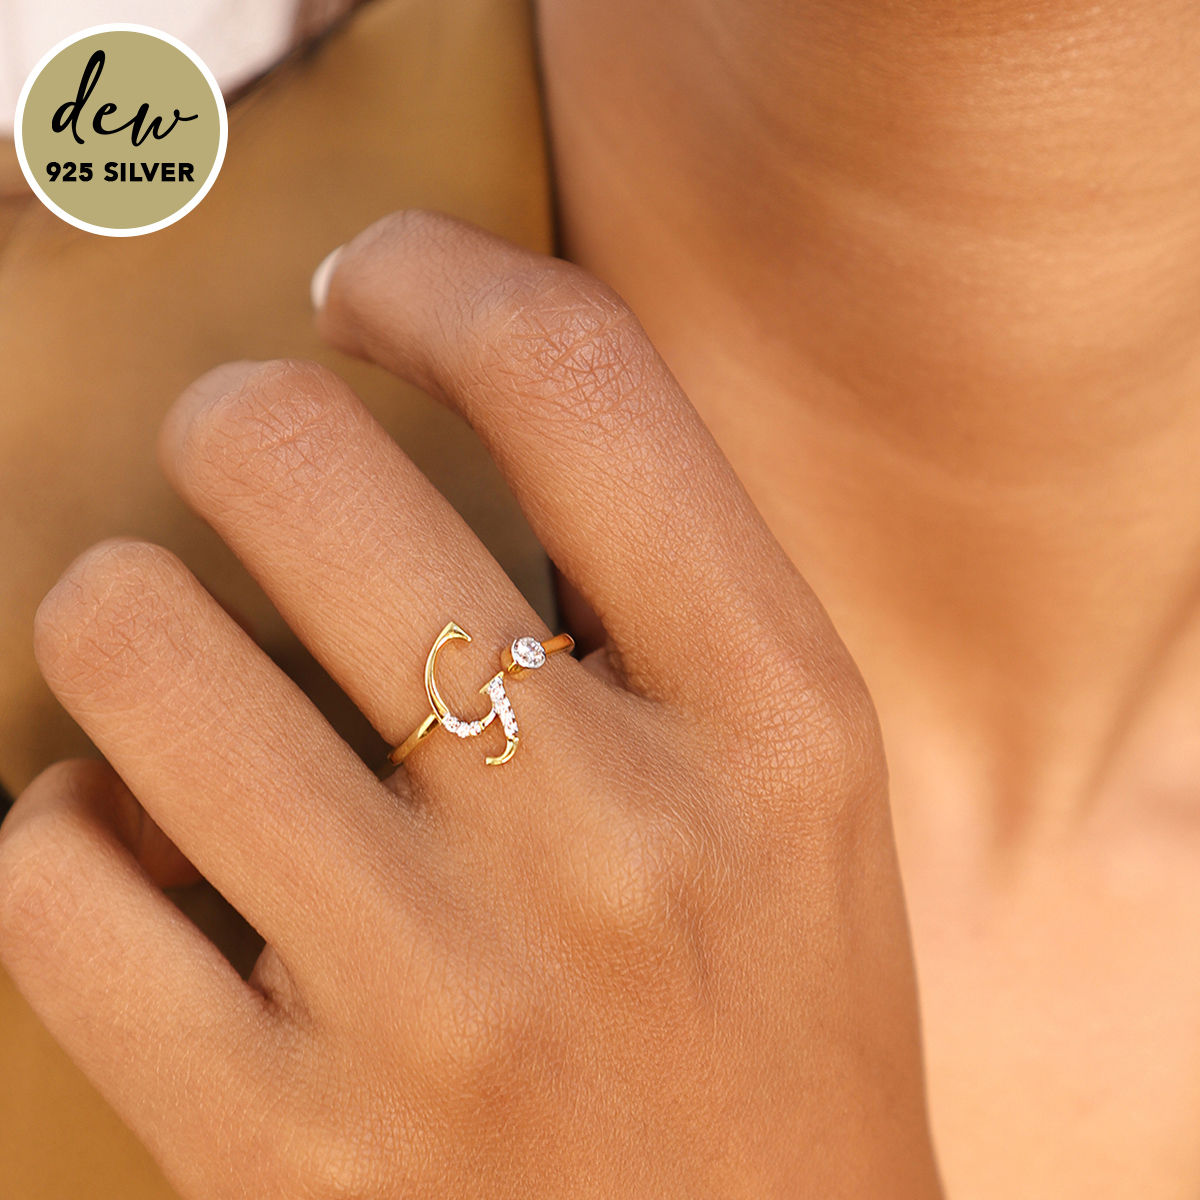 Gold-Plated 925 Sterling Silver Stone Studded Initial G Ring